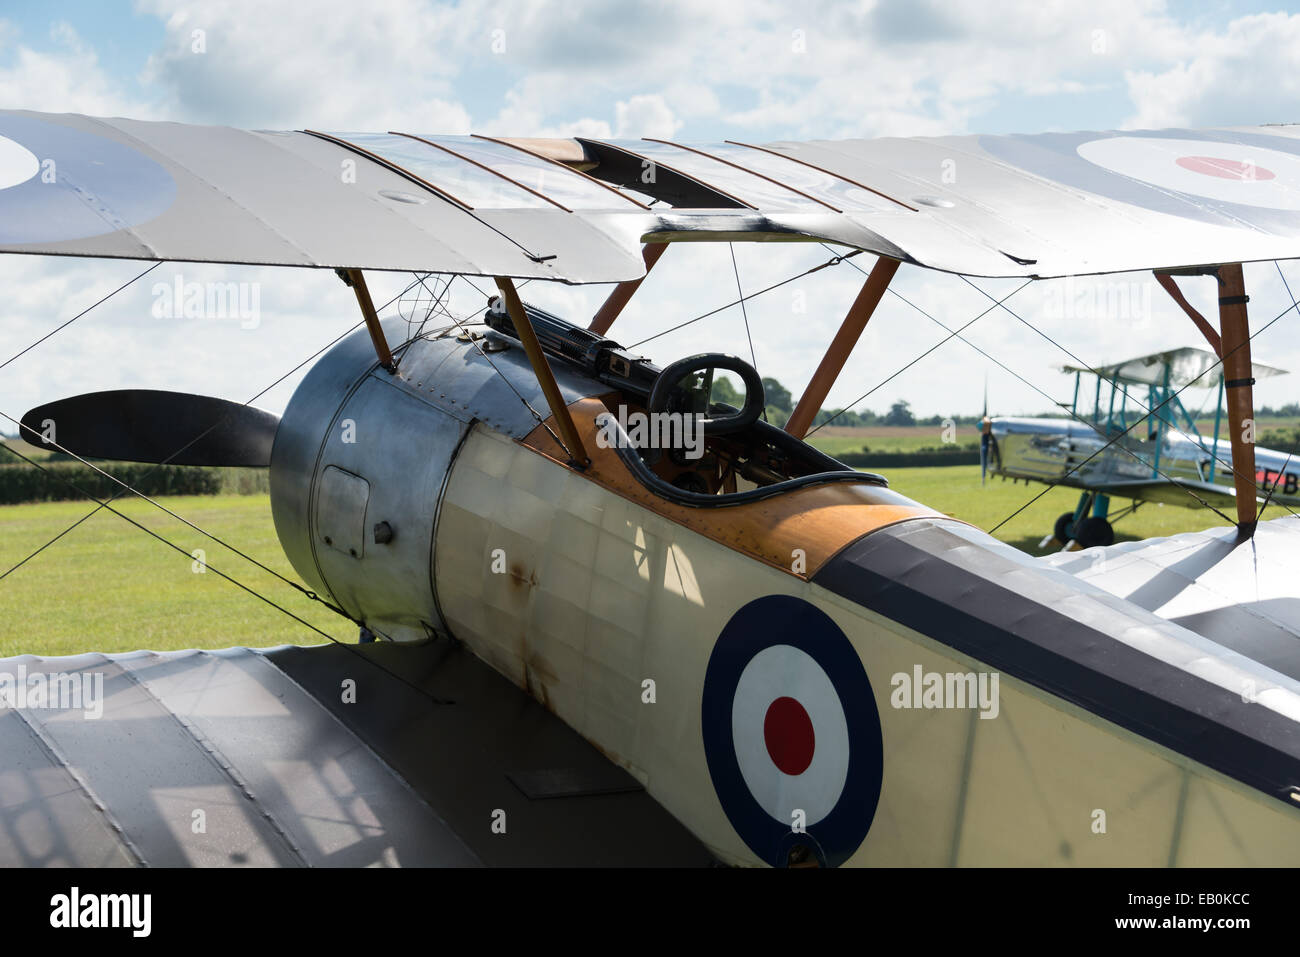 Biggleswade, UK - 29 June 2014: A vintage 1916 Sopwith Pup British fighter on display at the Shuttleworth Collection air show. Stock Photo